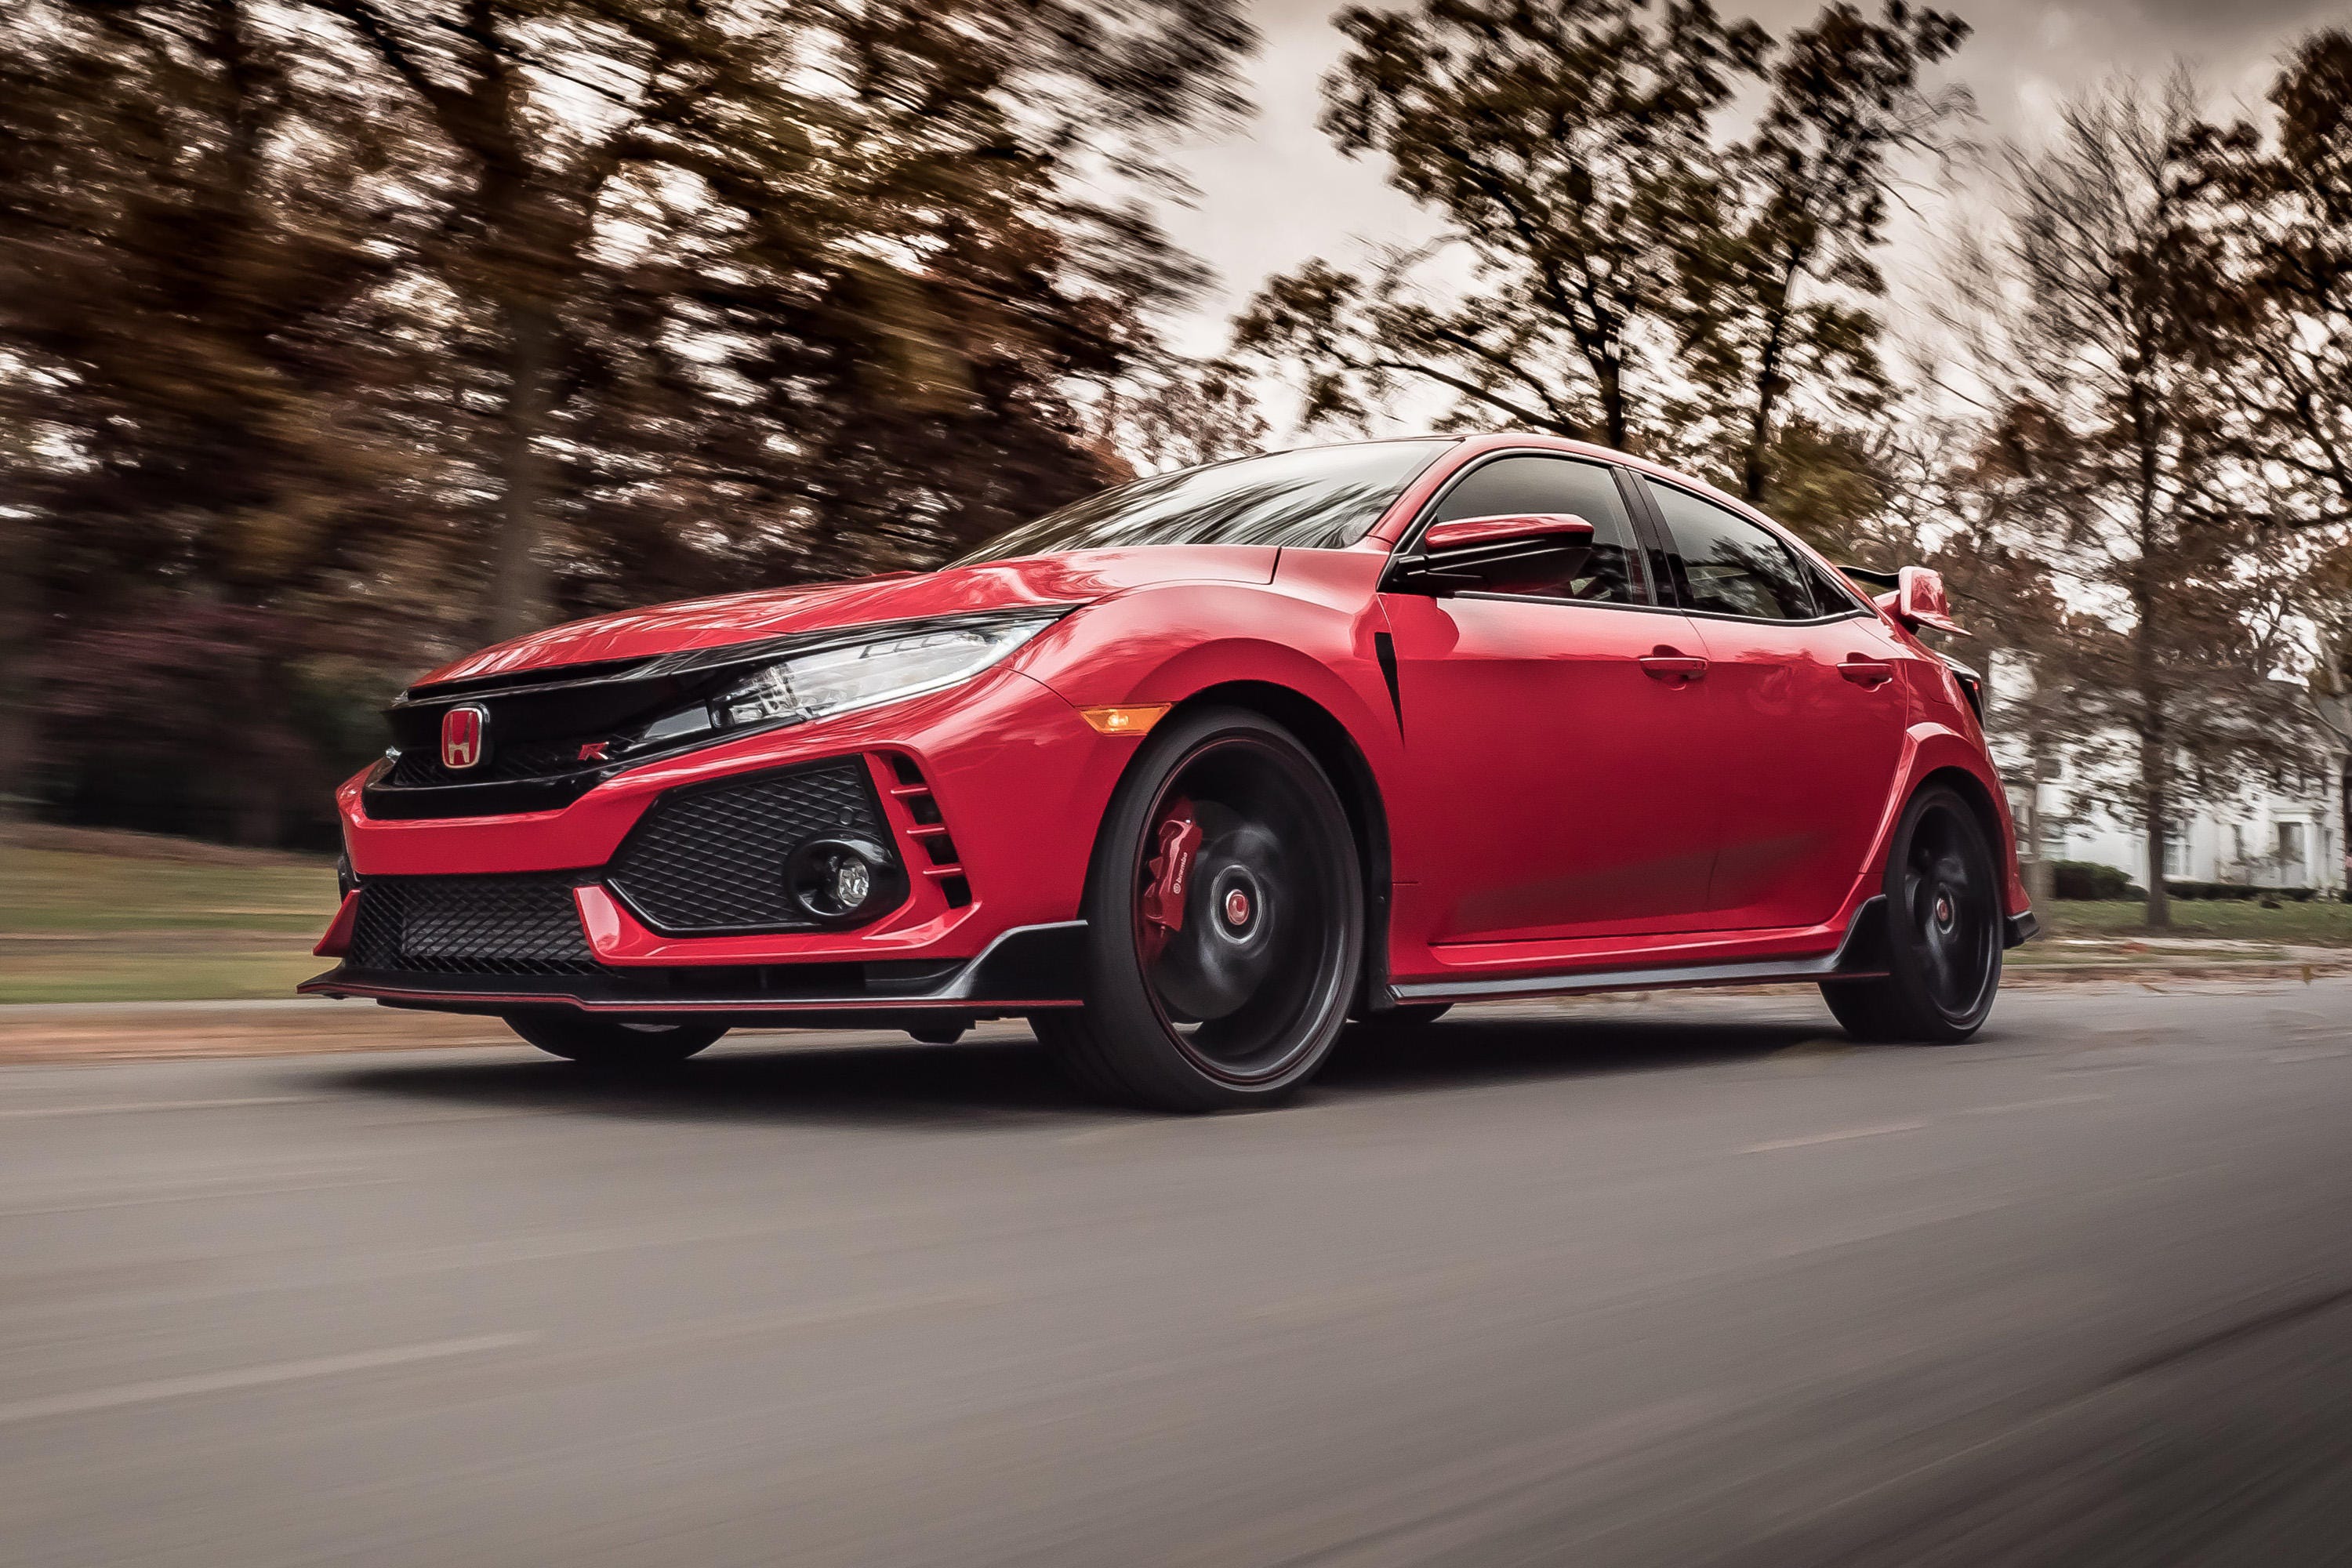 2018 Honda Civic Type R Review Ratings Specs Photos Price And More Roadshow